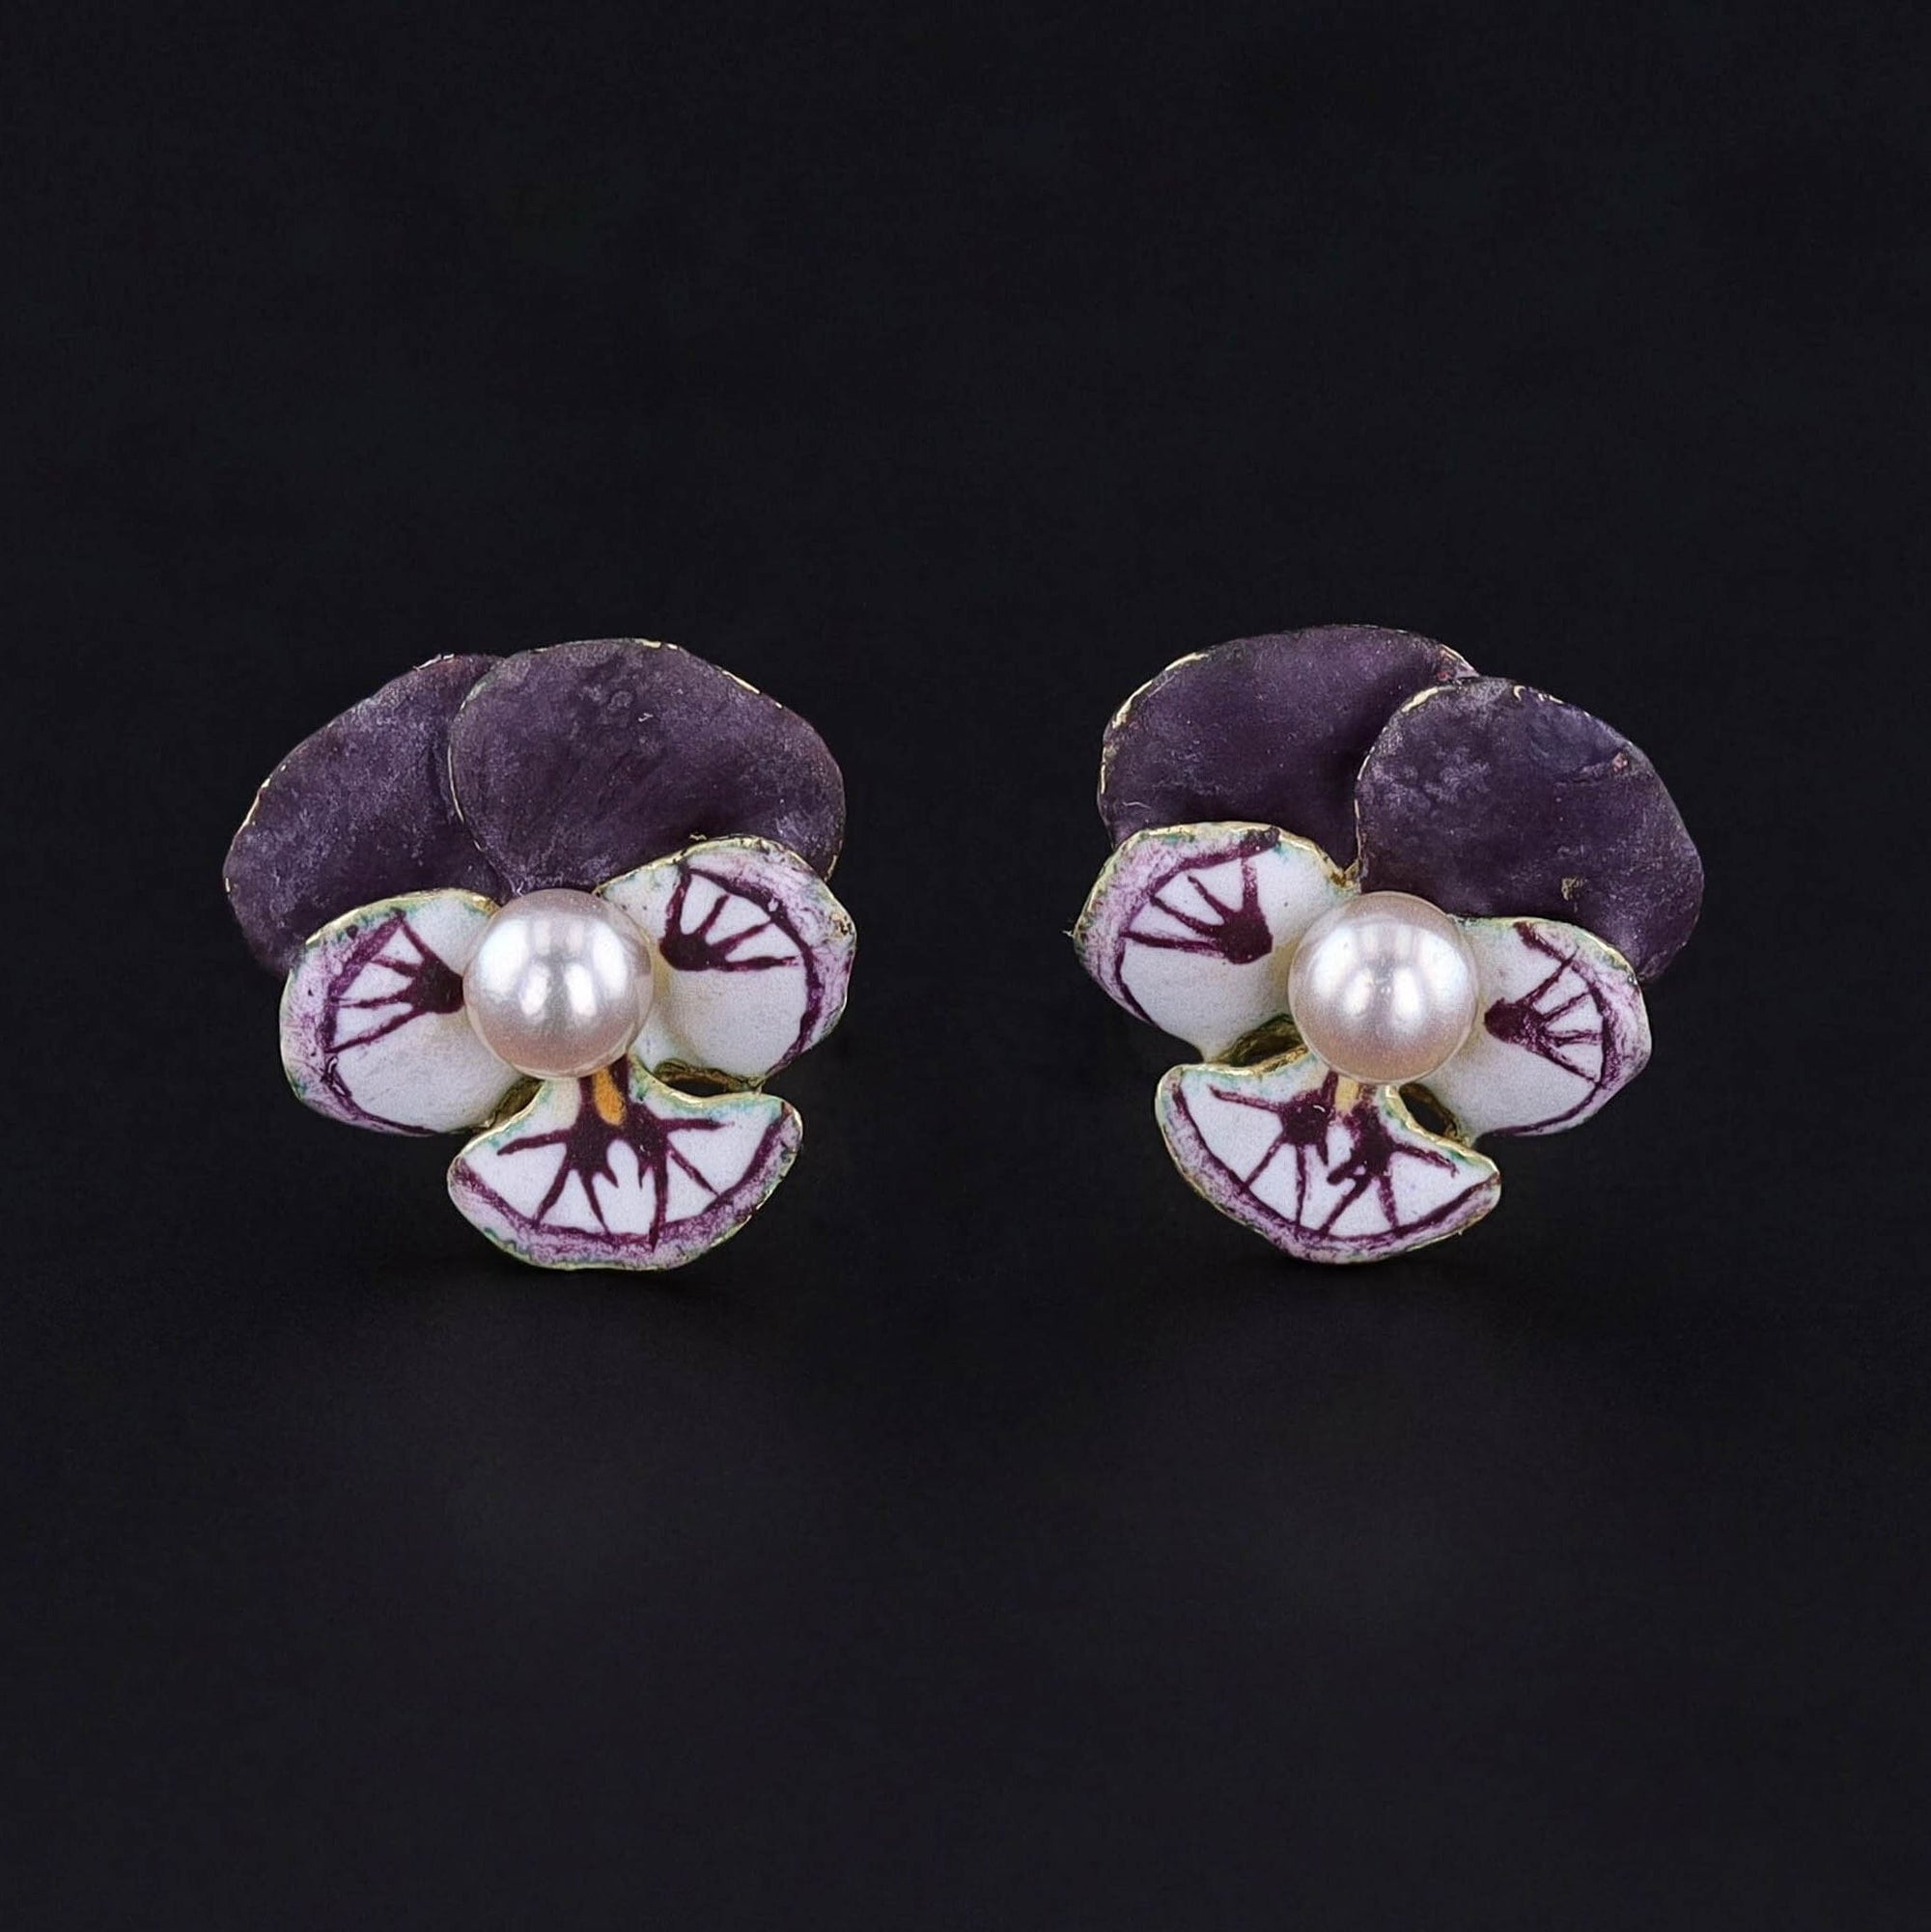 Vintage 14k gold enamel and pearl pansy stud earrings from the 1950s. The purple pansies are in great condition and perfect for any jewelry collector or lover of floral jewelry.